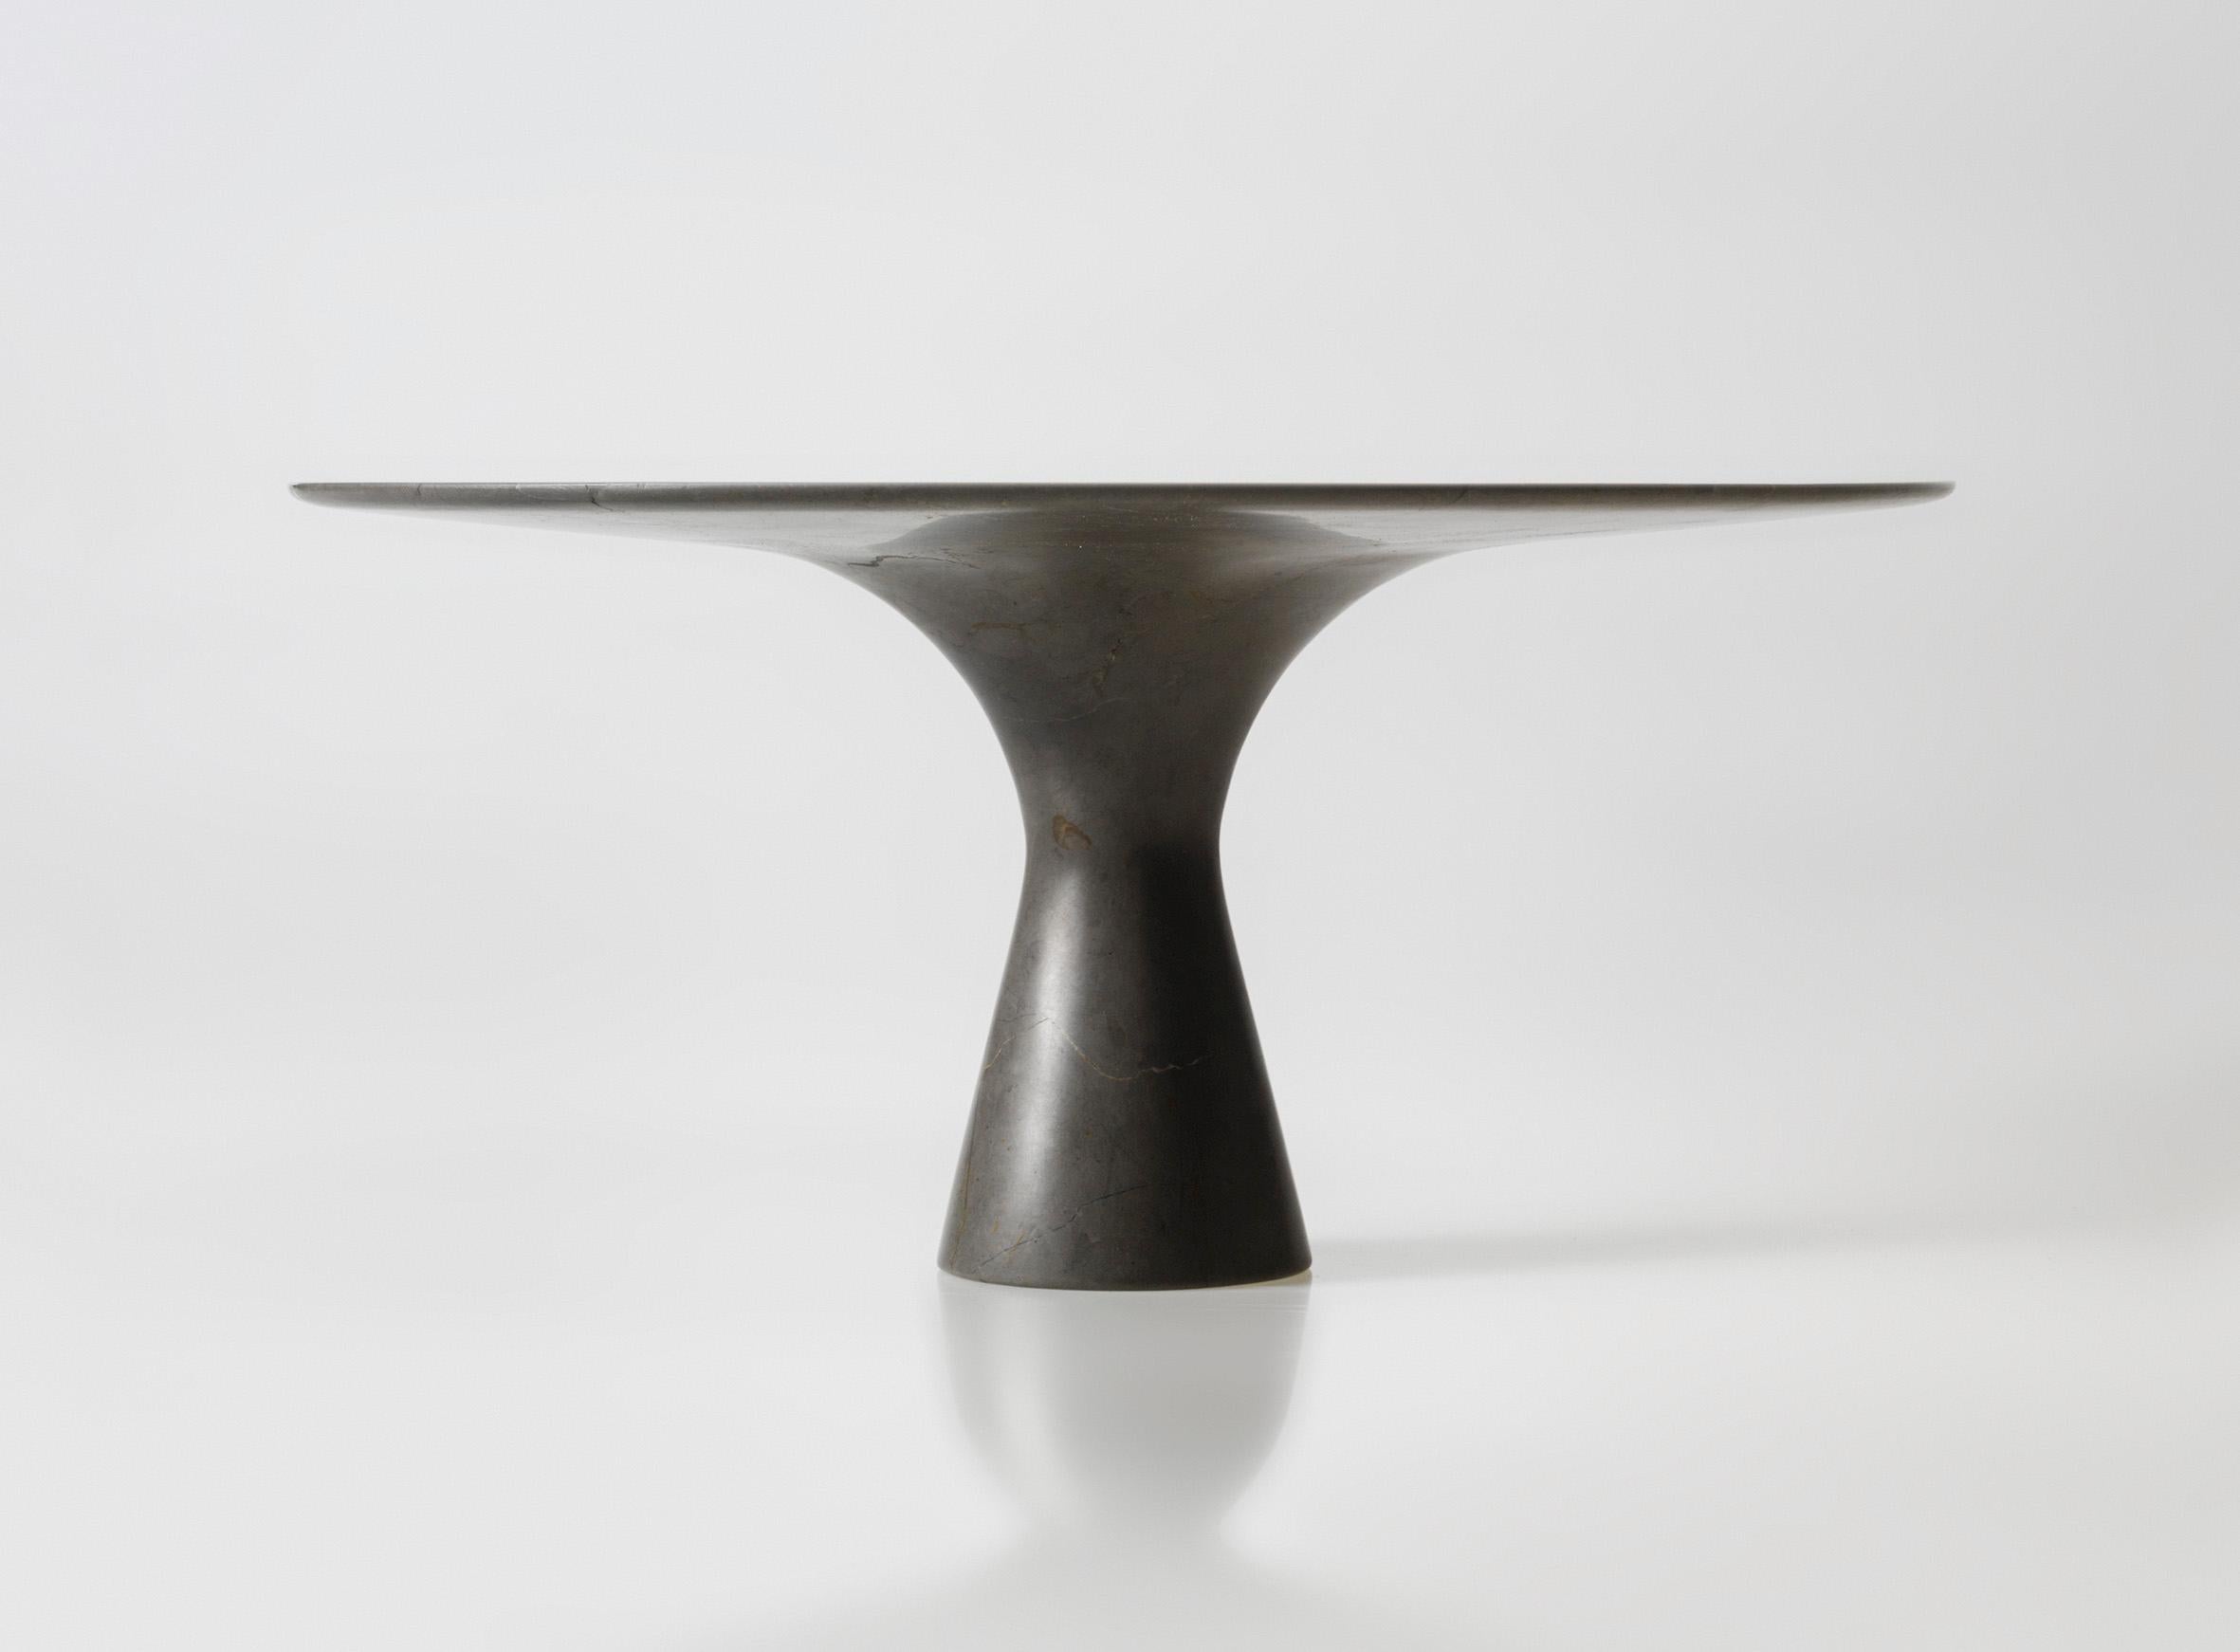 Grafite Refined Contemporary Marble Oval Table 210/75
Dimensions: 210 x 135 x 75 cm
Materials: Grafite.

Angelo is the essence of a round table in natural stone, a sculptural shape in robust material with elegant lines and refined finishes.

The